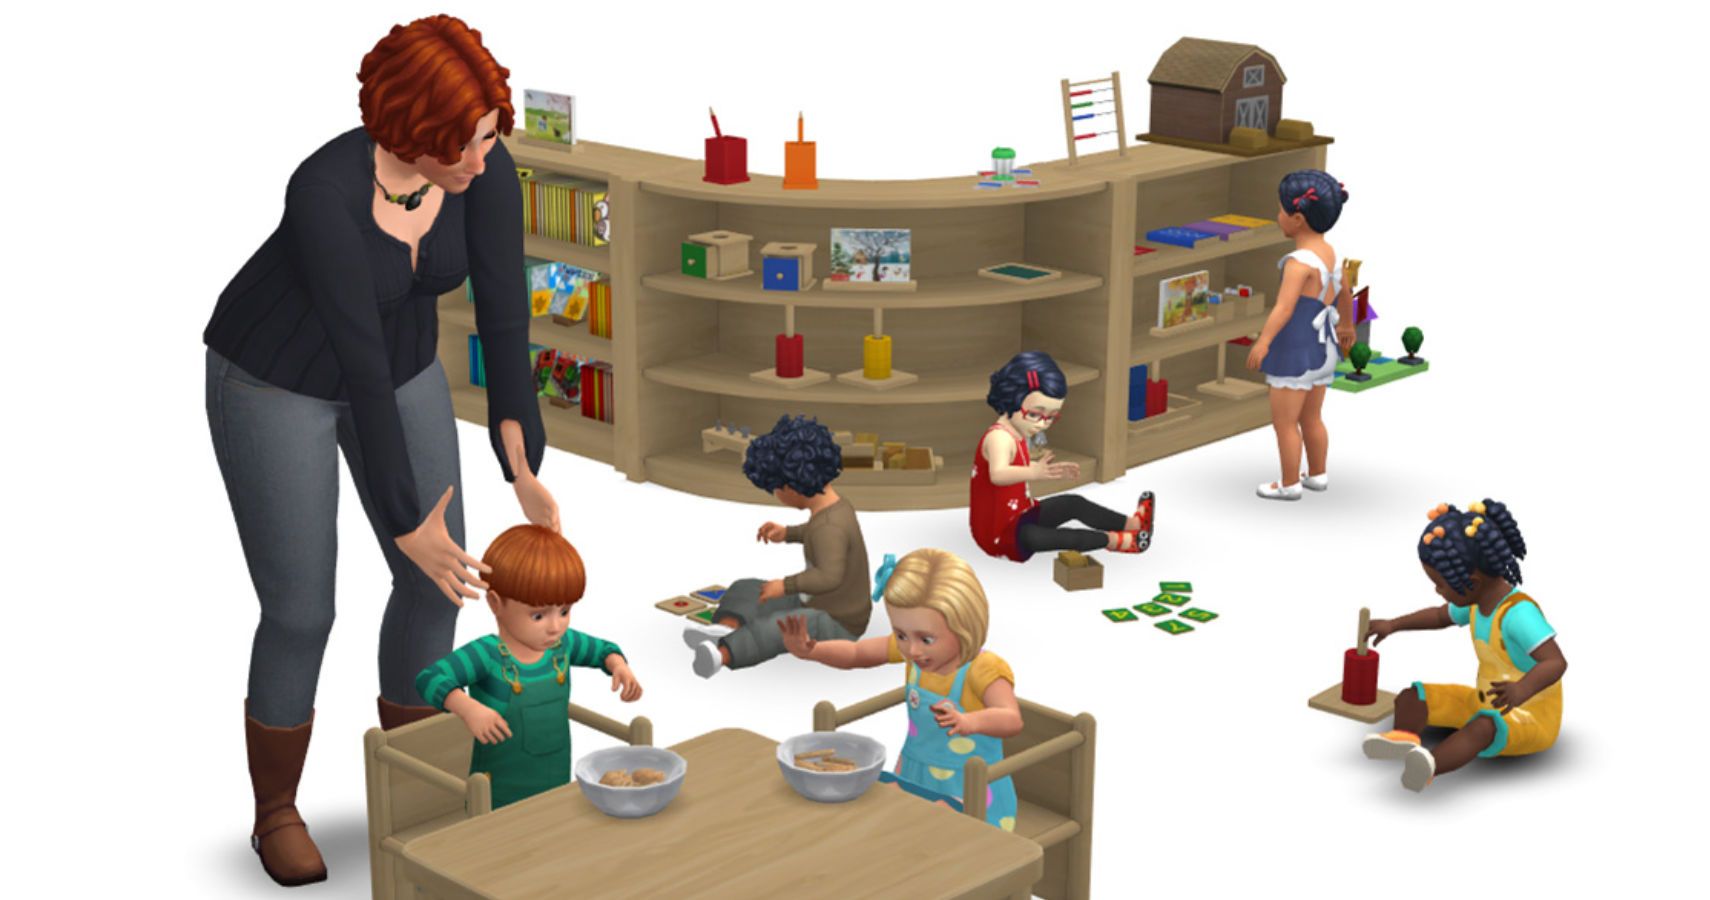 toddlers sat at a table eating while two others play with puzzles in front of a bookshelf. An adult supervises.